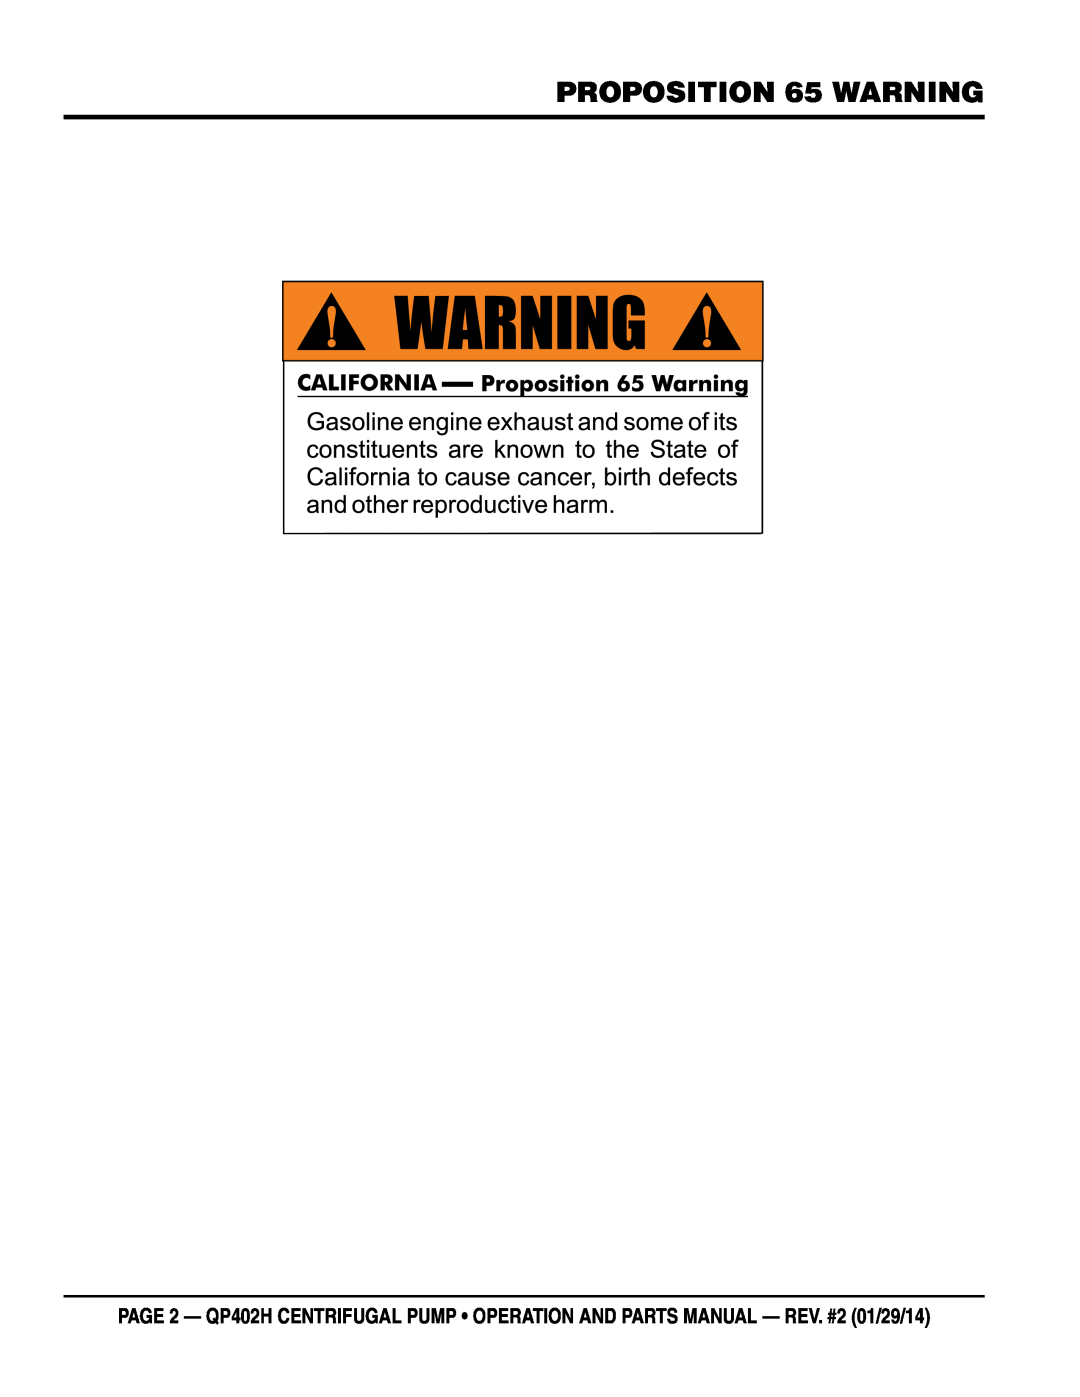 Multiquip qp402h manual PROPOSITION 65 WARNING 